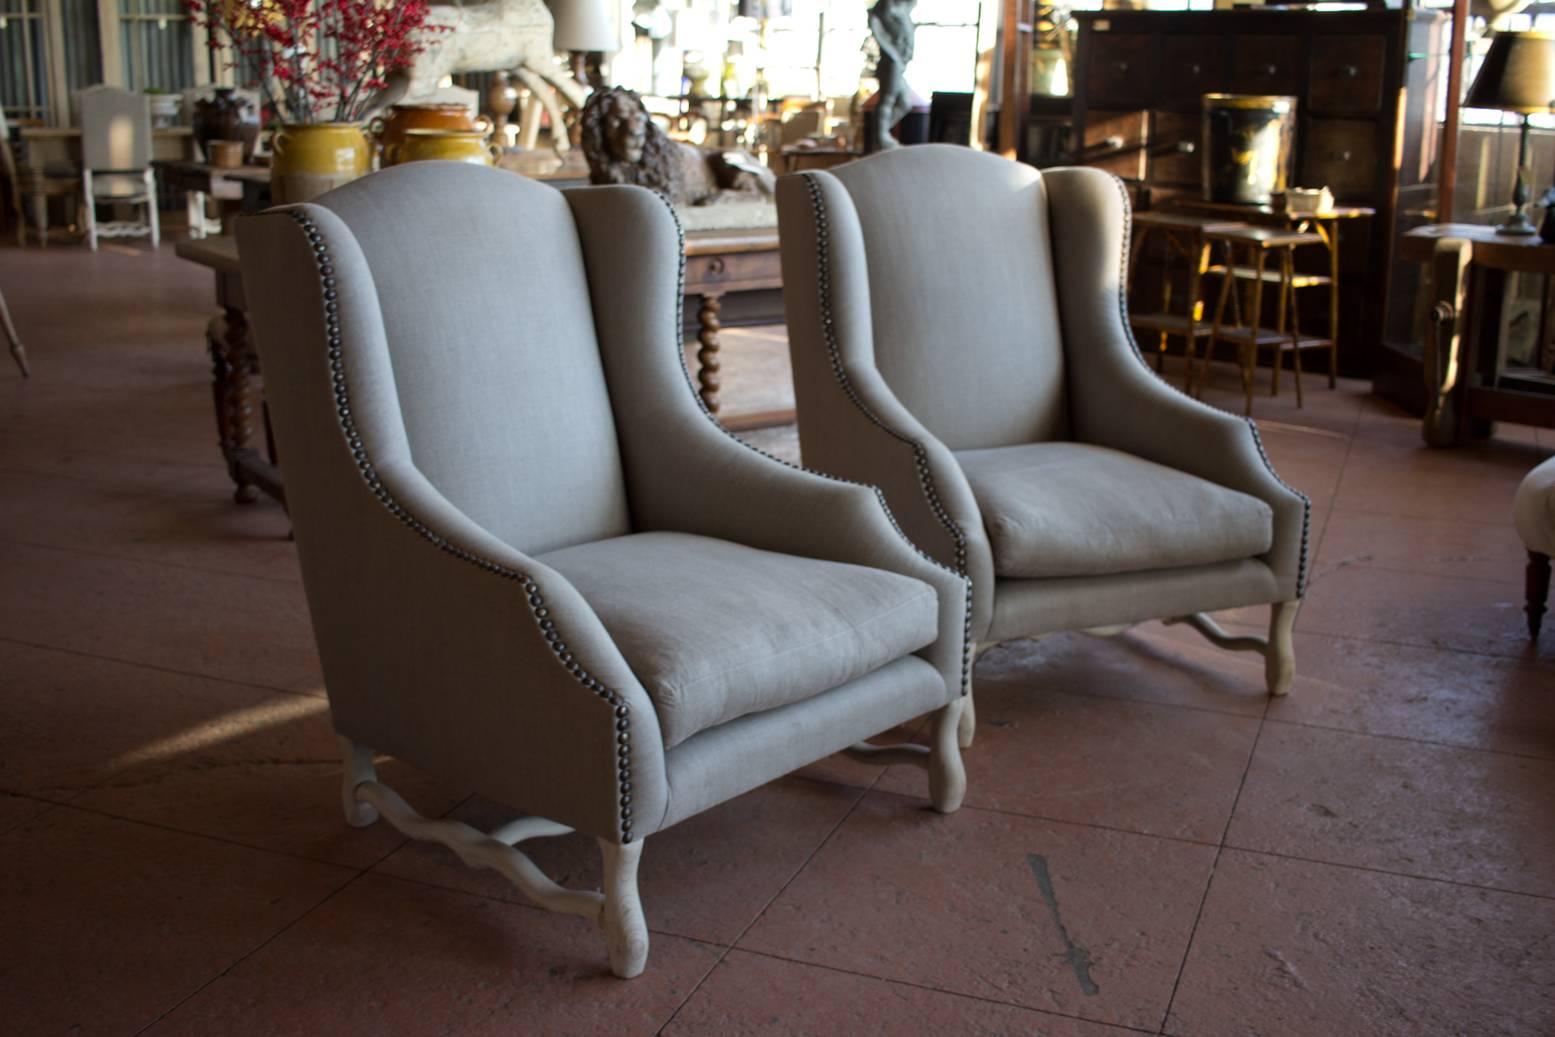 Pair of large-scale down filled antique Os du Mouton bergères chairs. The legs have a newly limed finish. The newly upholstered French linen and brass studded chairs are down filled.